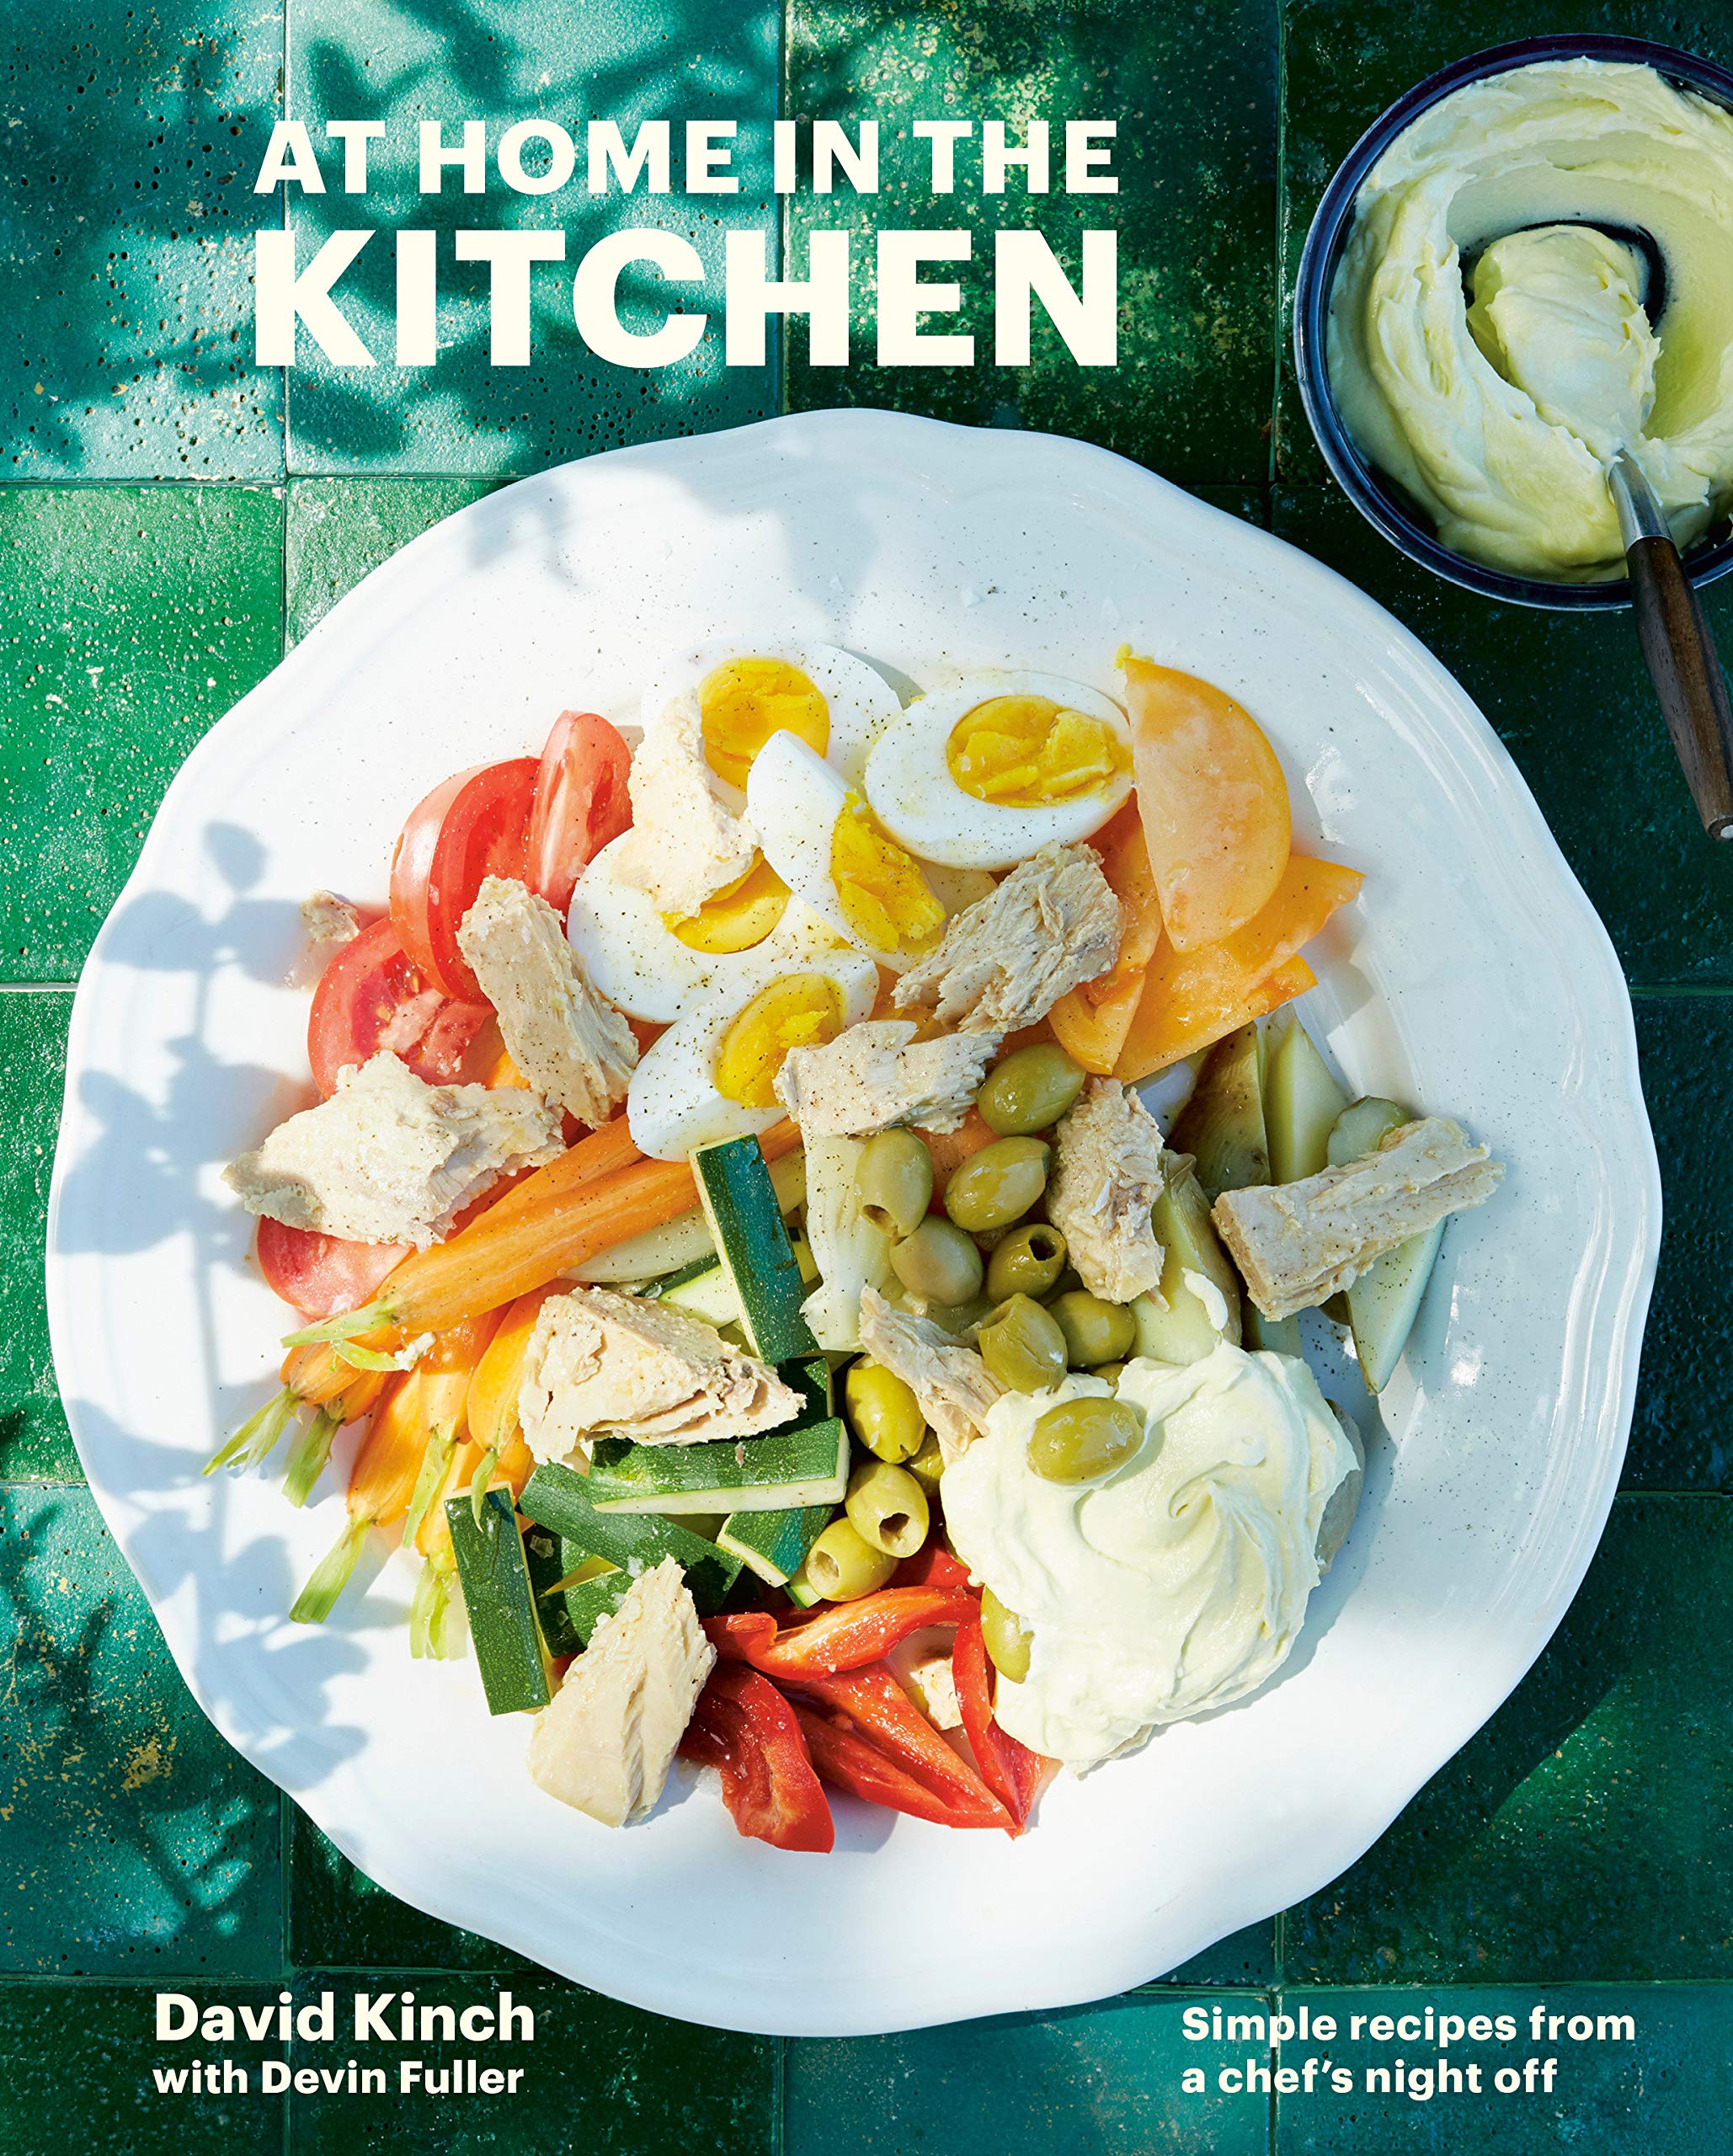 At Home in the Kitchen: Simple Recipes from a Chef's Night Off Cookbook (Hardcover) $9.22 + Free Shipping w/ Prime or $25+